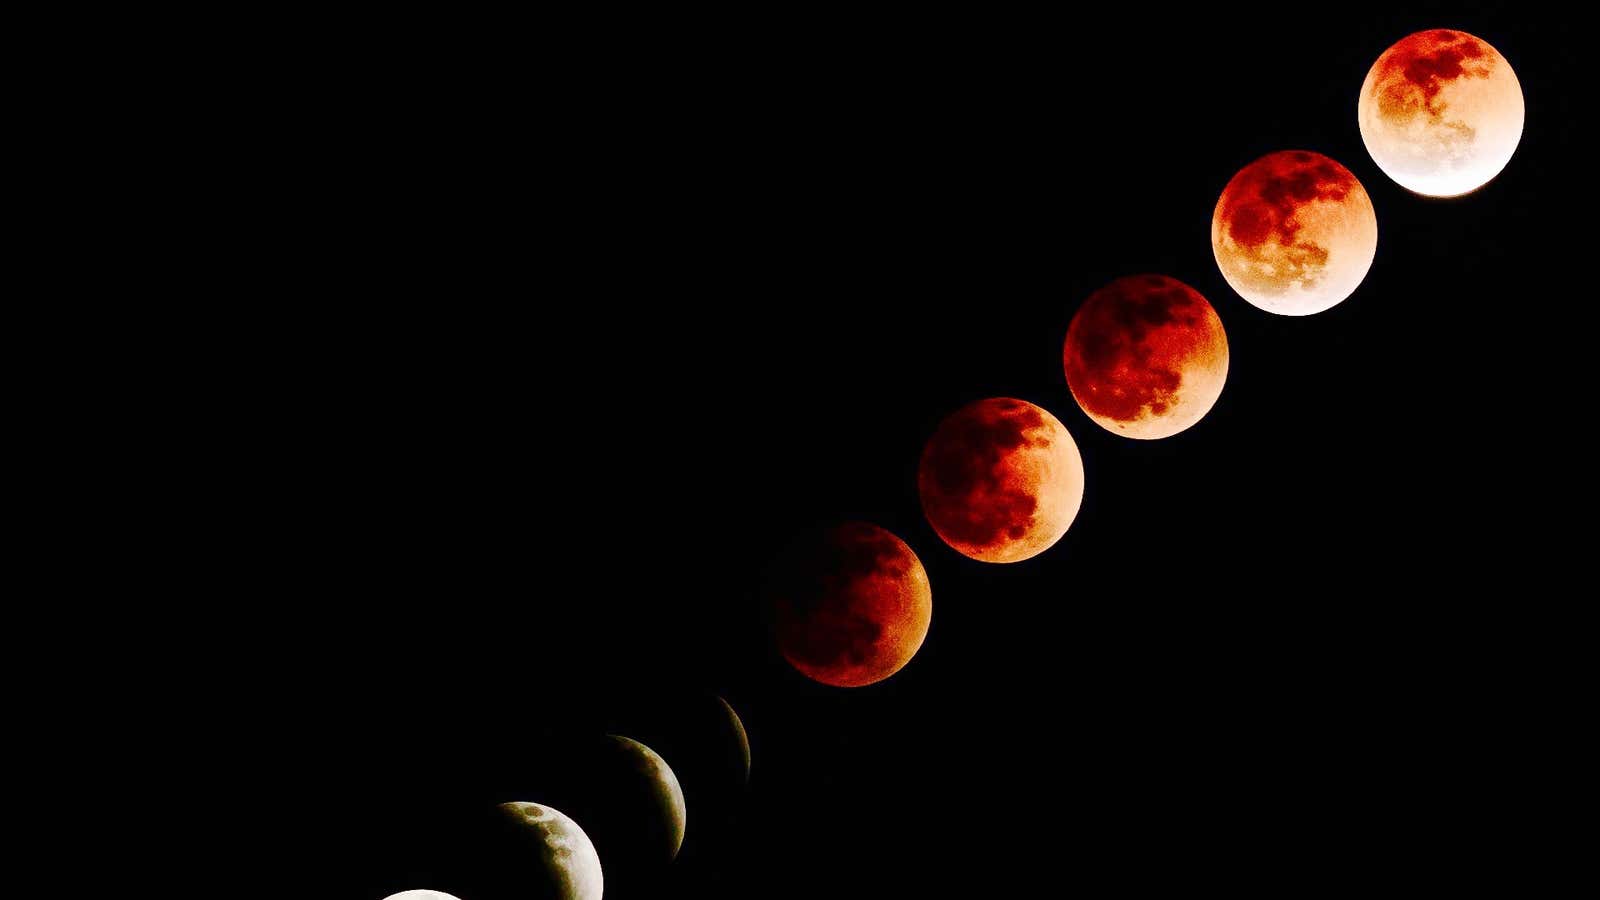 Phases of the blood moon.